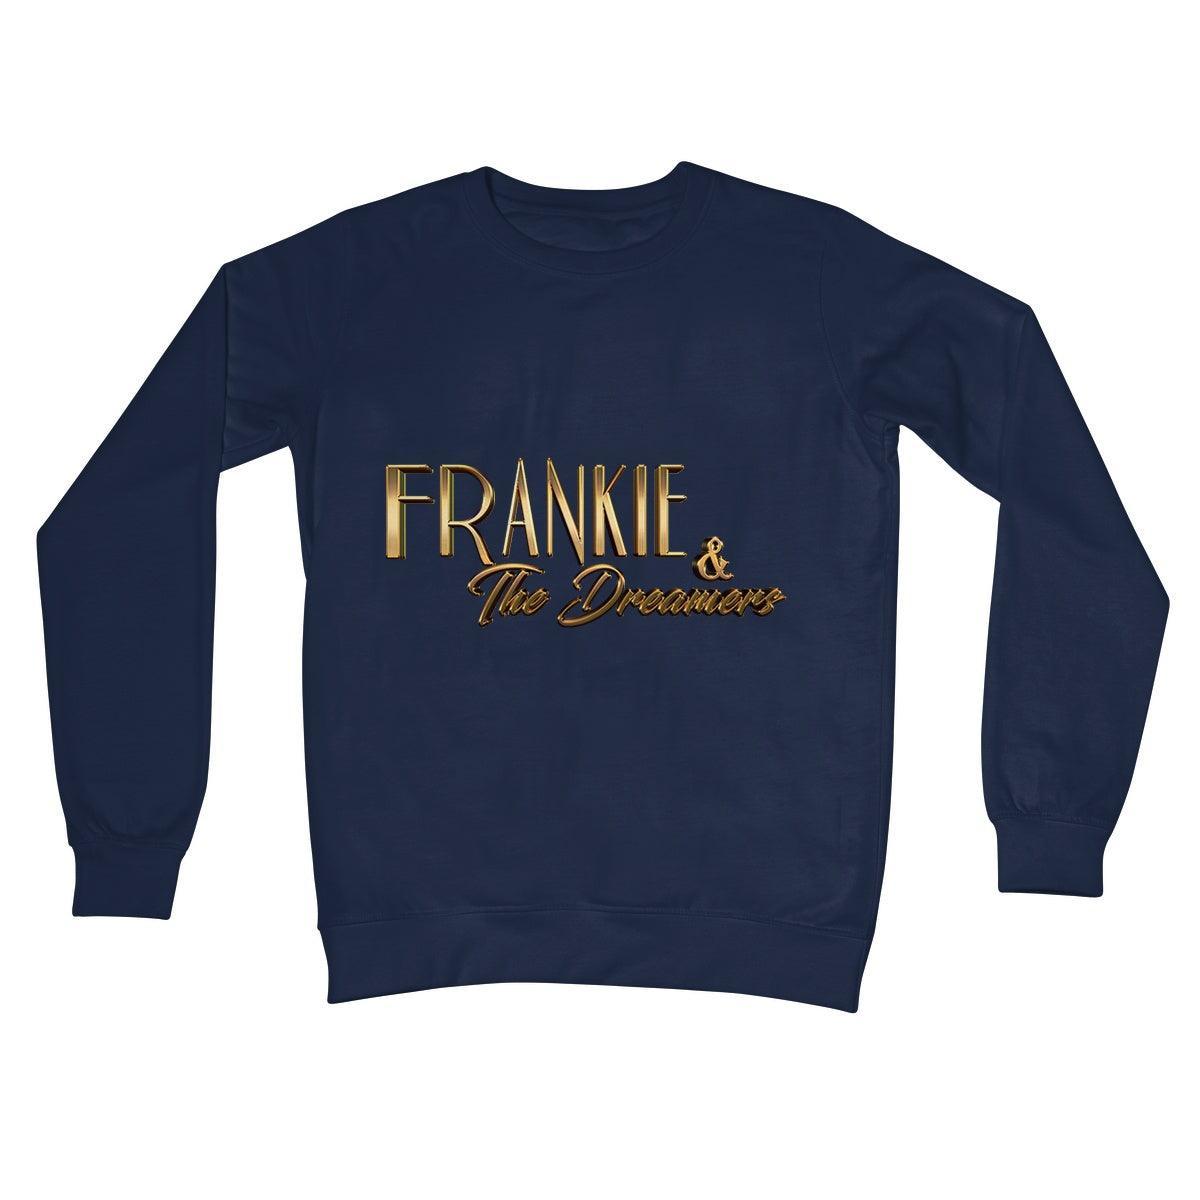 Frankie And The Dreamers Crew Neck Sweatshirt | Apparel Oxford Navy